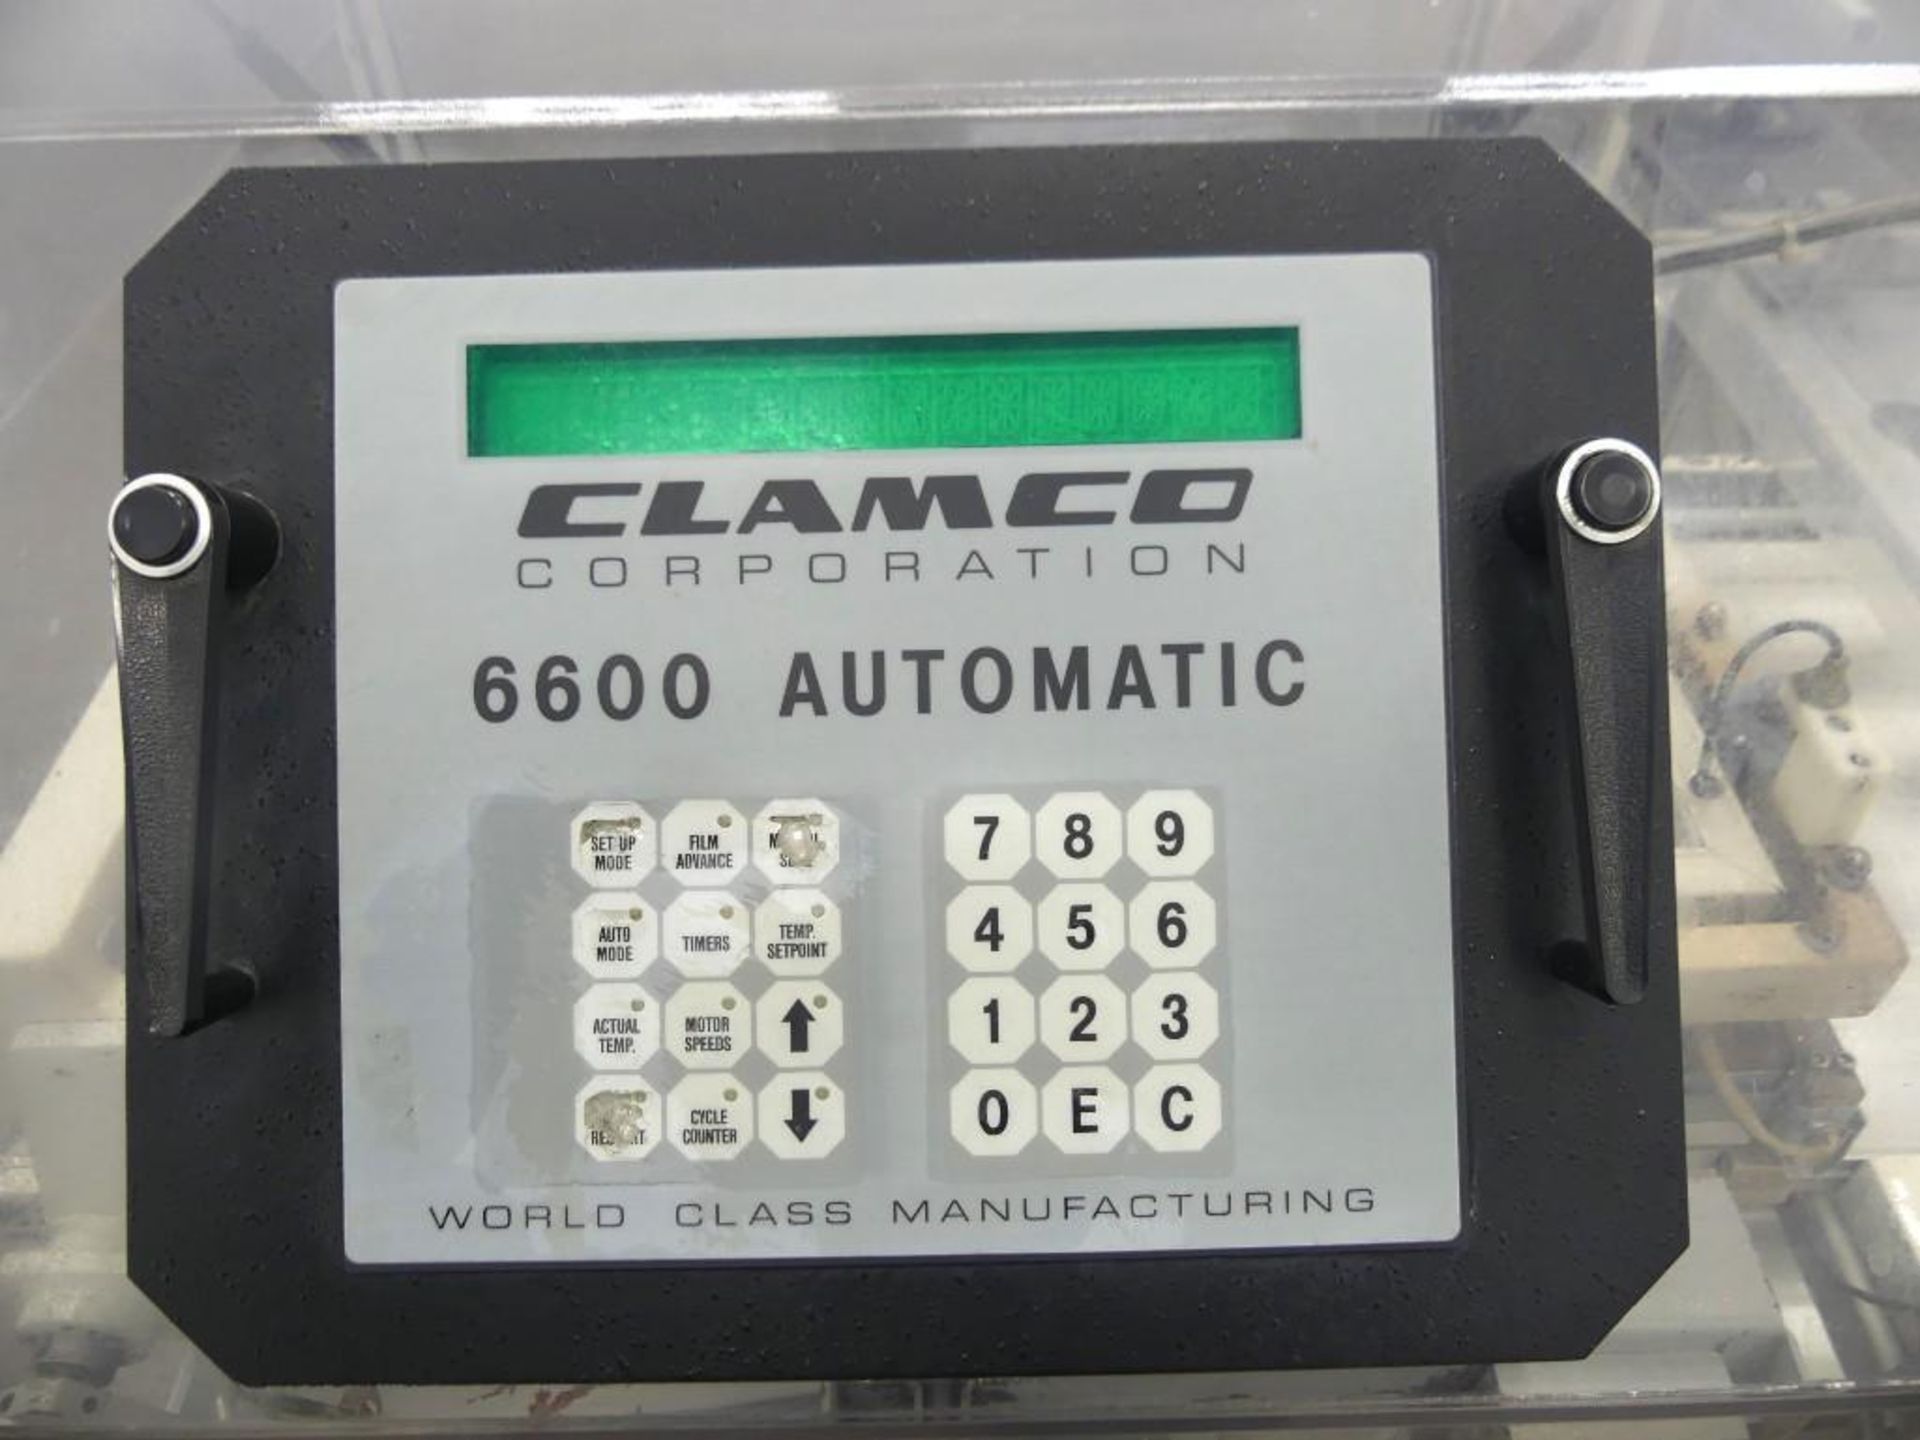 Clamco 6600 Automatic L-Bar Sealer with 18" x 23.5" Seal Area - Image 21 of 22